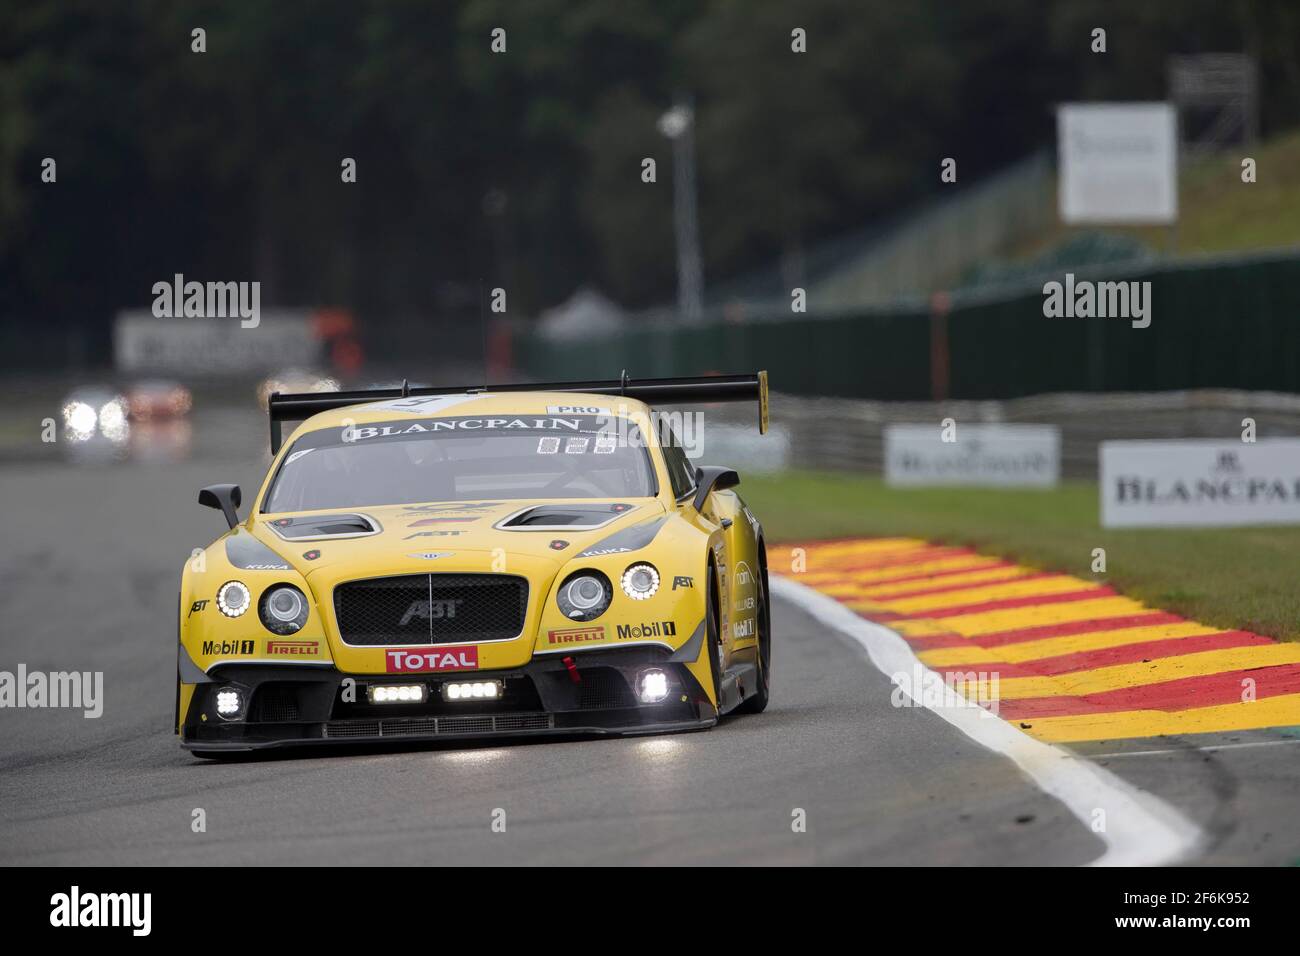 Page 7 - Bentley Continental Gt Auto High Resolution Stock Photography and  Images - Alamy